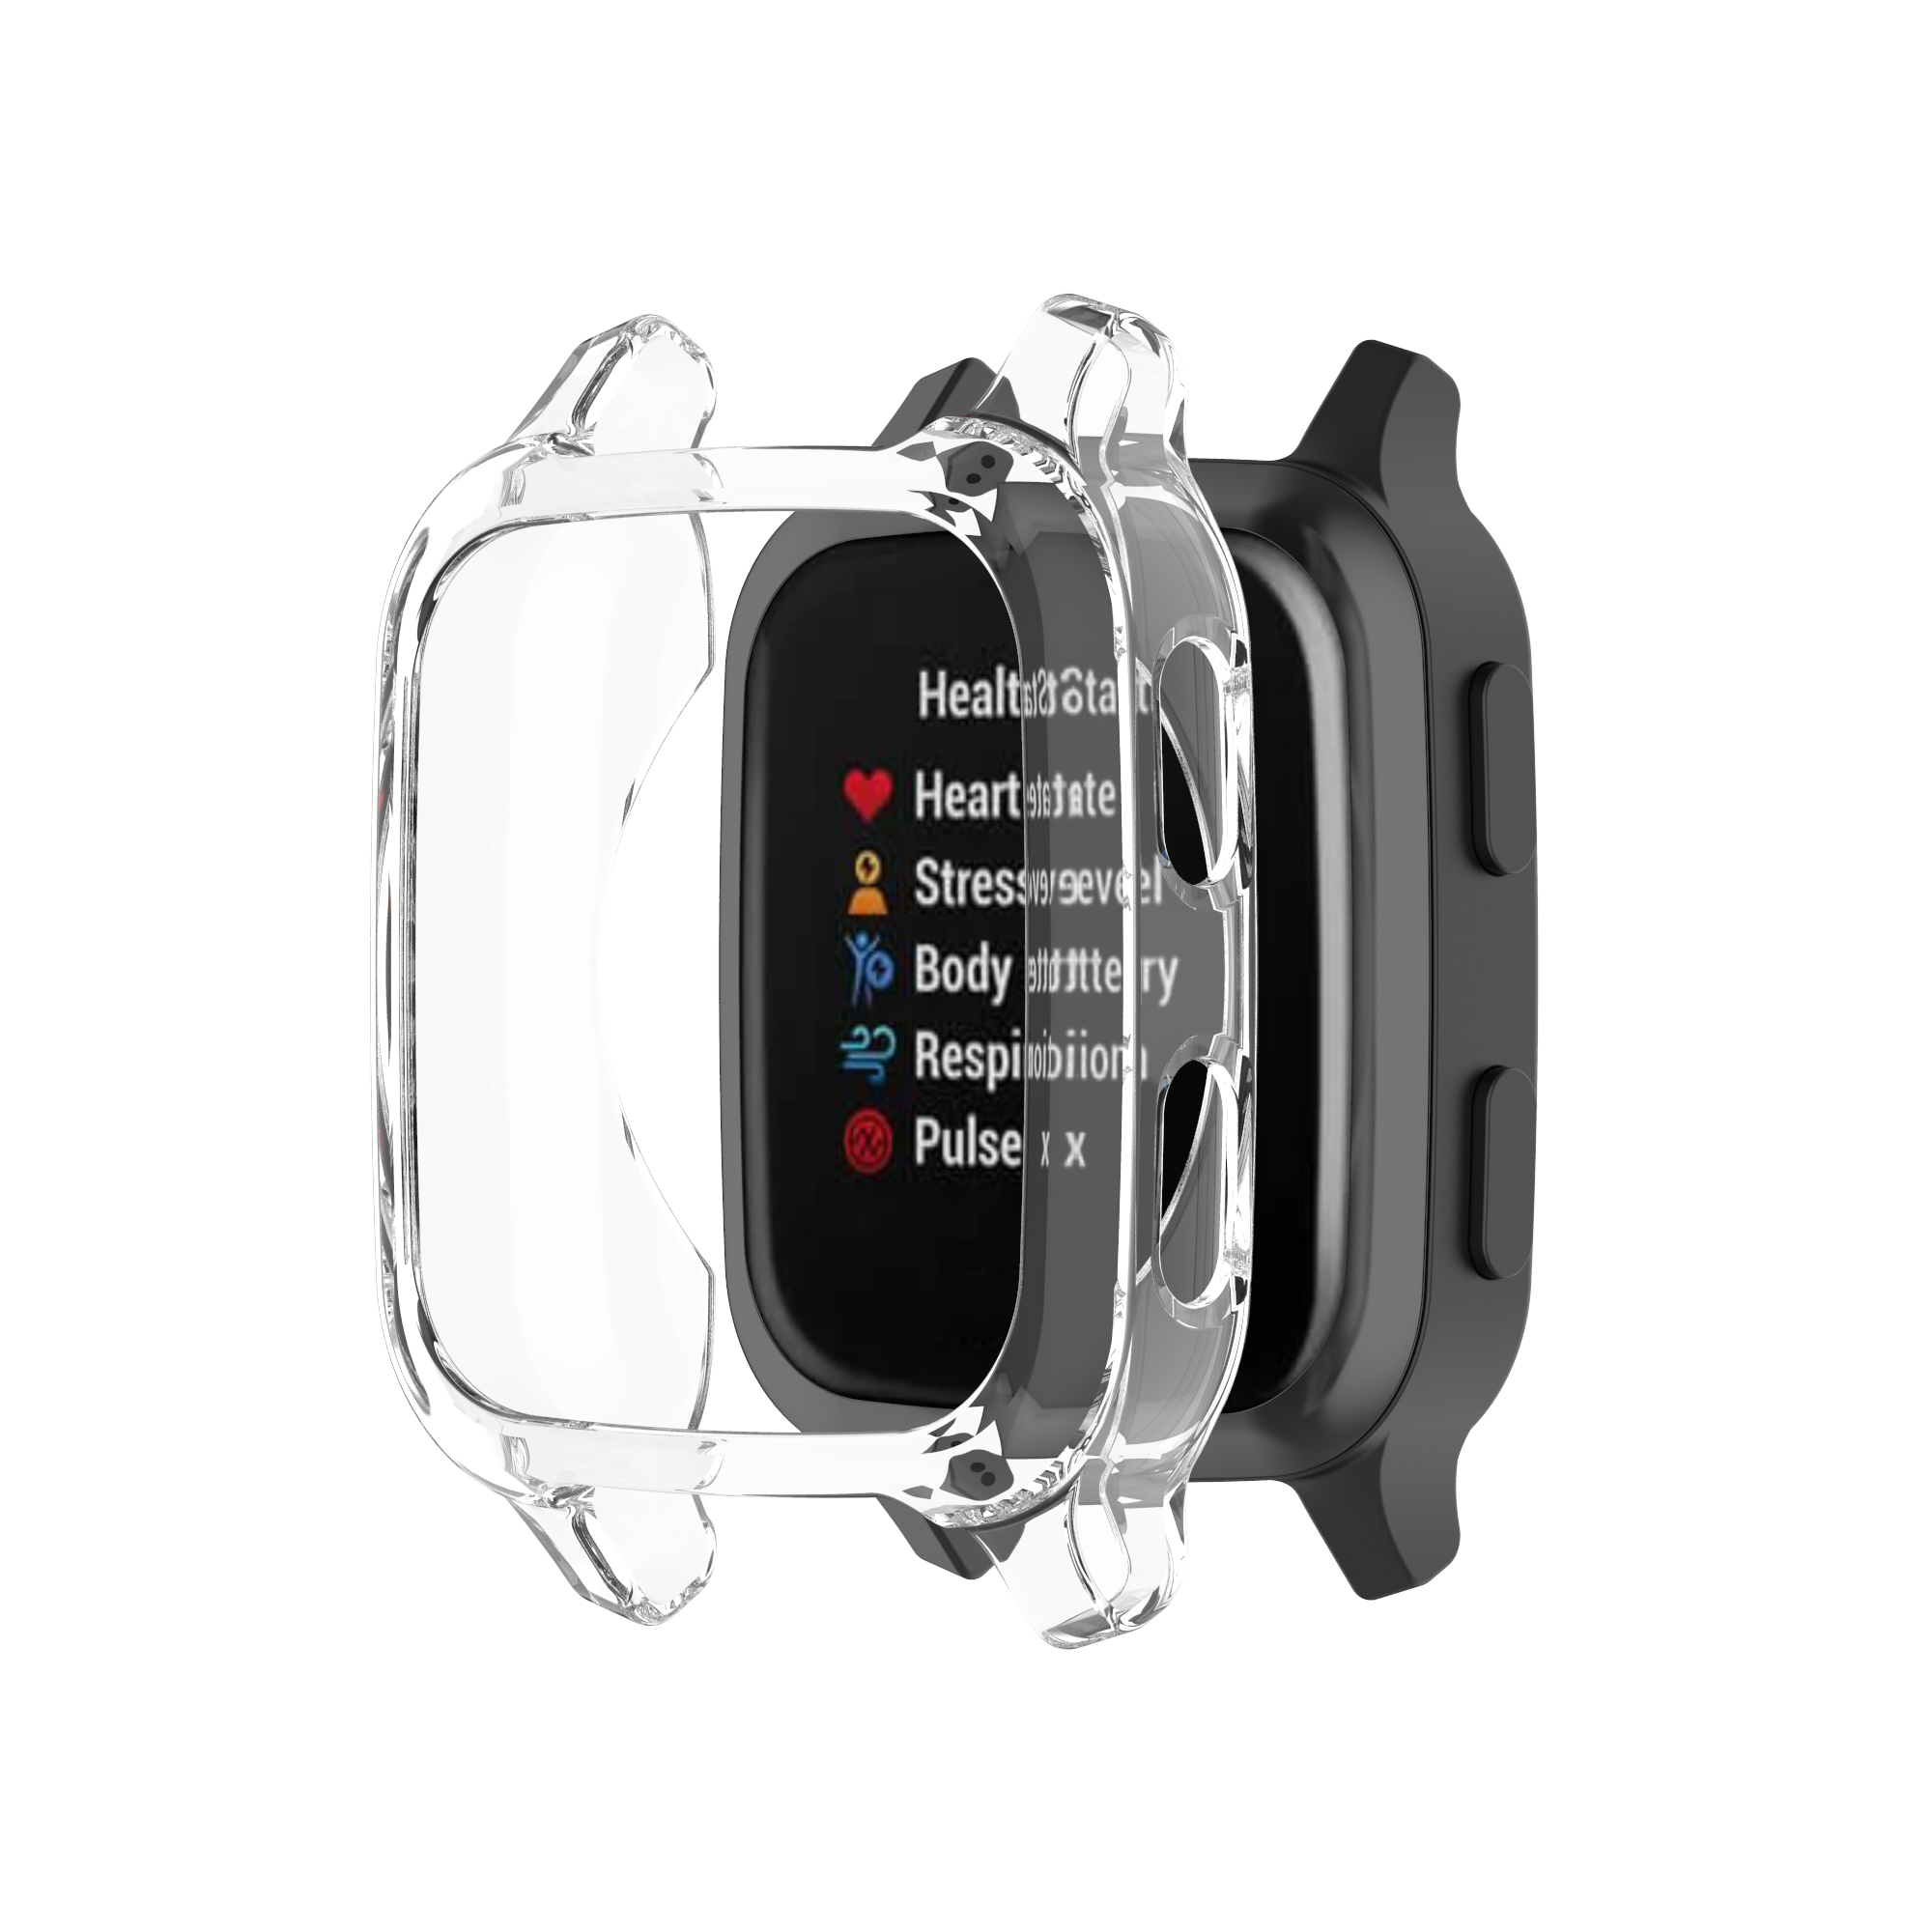 Bakeey-TPU-Transparent-Half-pack-Watch-Case-Cover-Watch-Shell-Protector-For-Garmin-Venu-sq-1791985-5